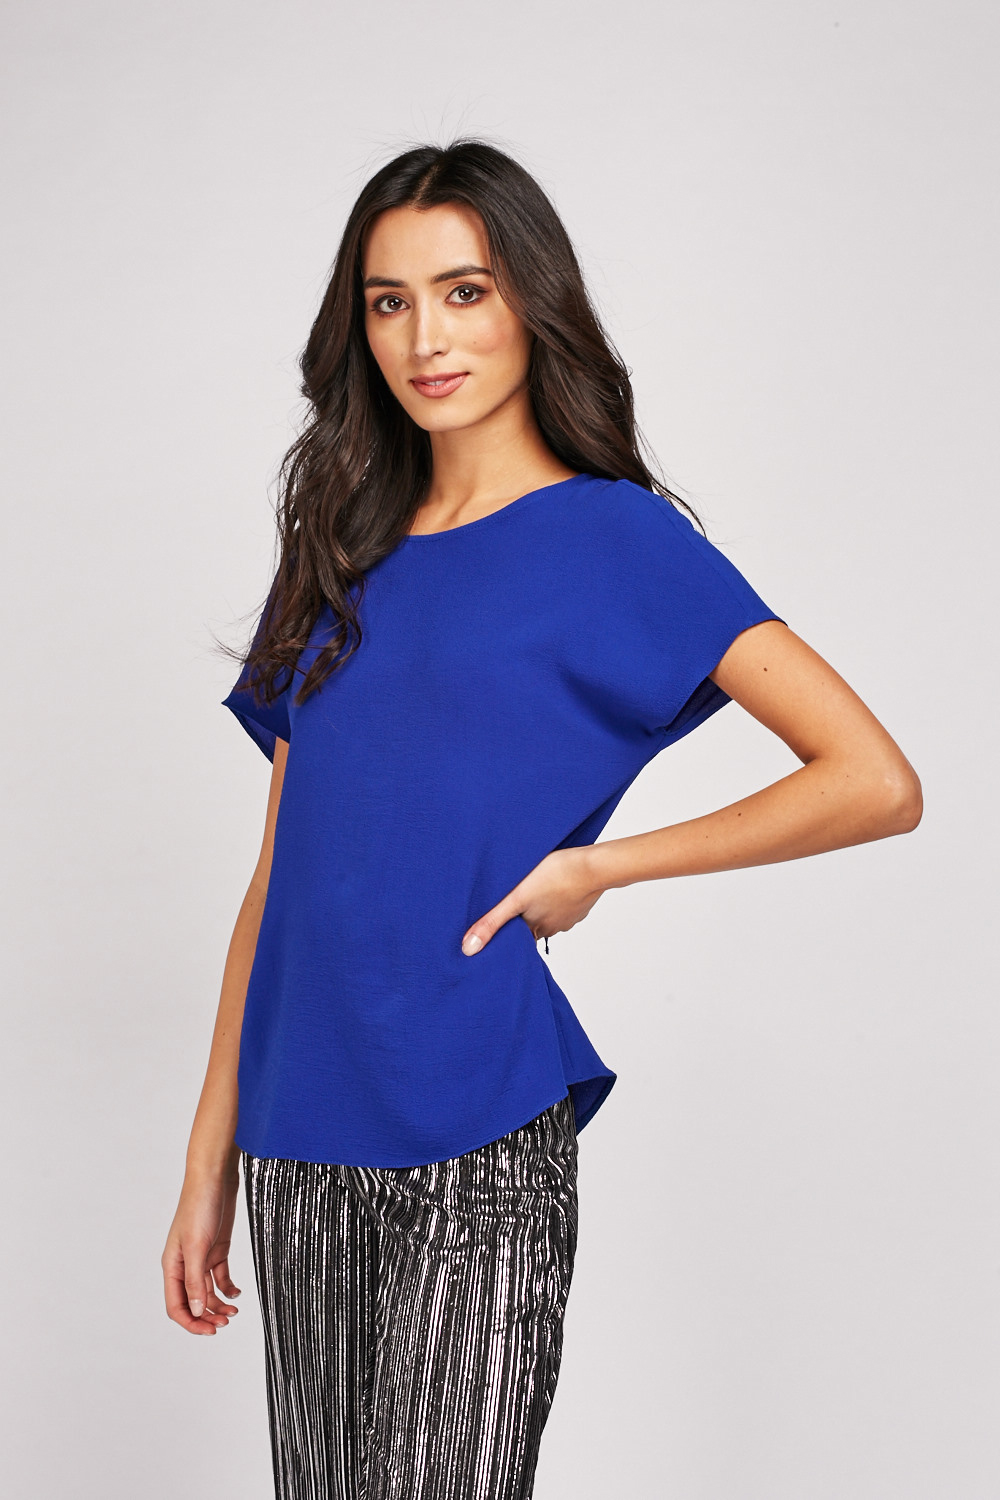 Tie Up Back Royal Blue Top - Just $3